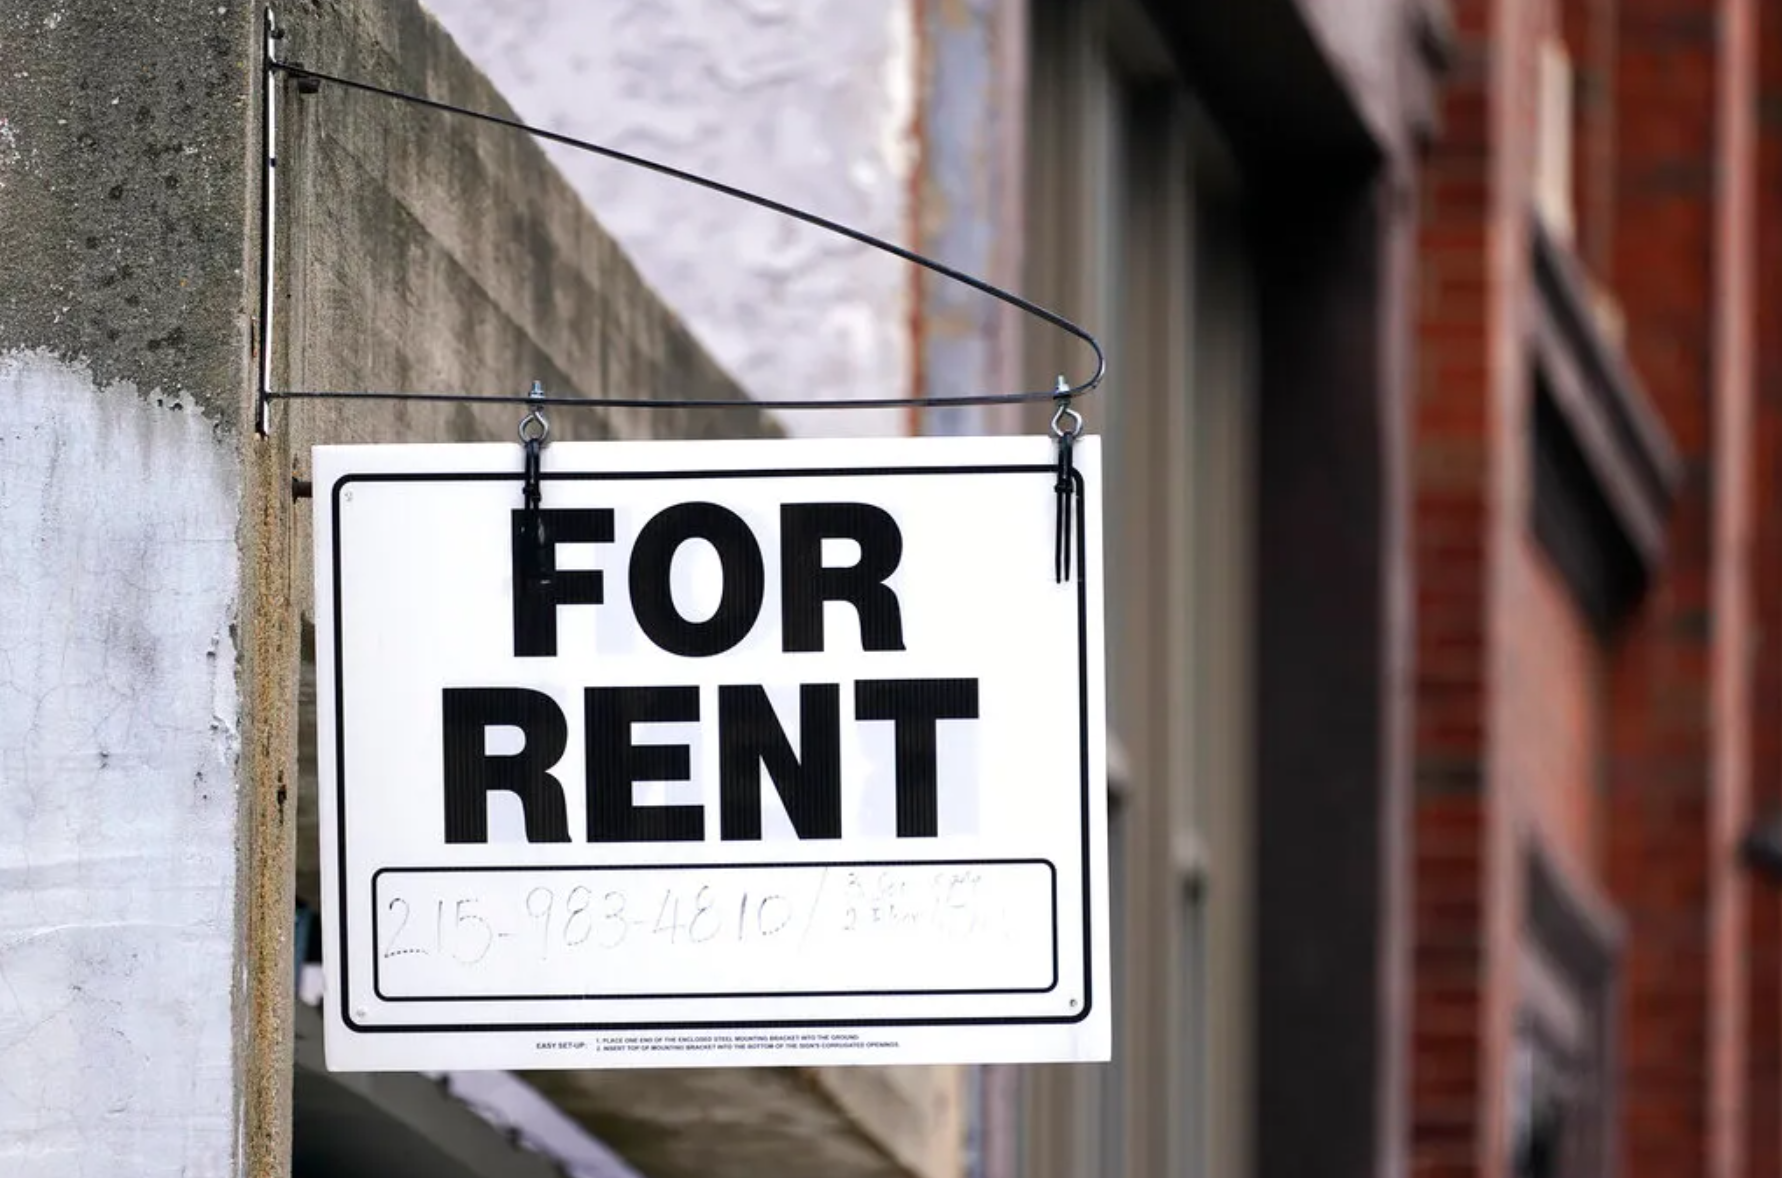 It costs how much? Memphis metro ranks No. 11 in lowest median rent estimate